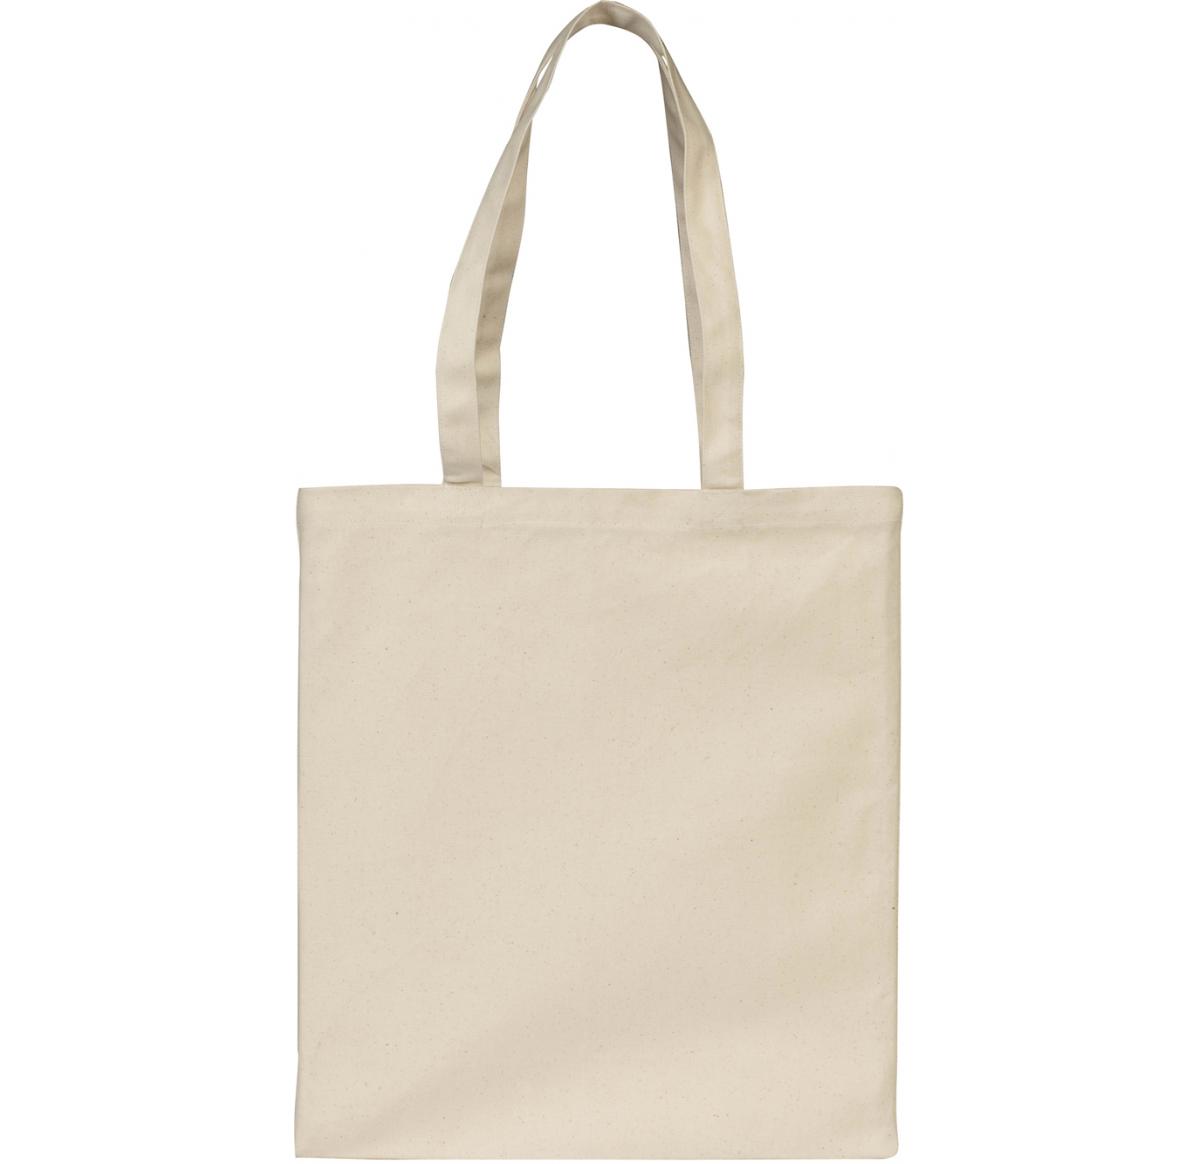 Printed Canvas Tote Bag 12oz Cotton Natural London - Buy Promotional ...